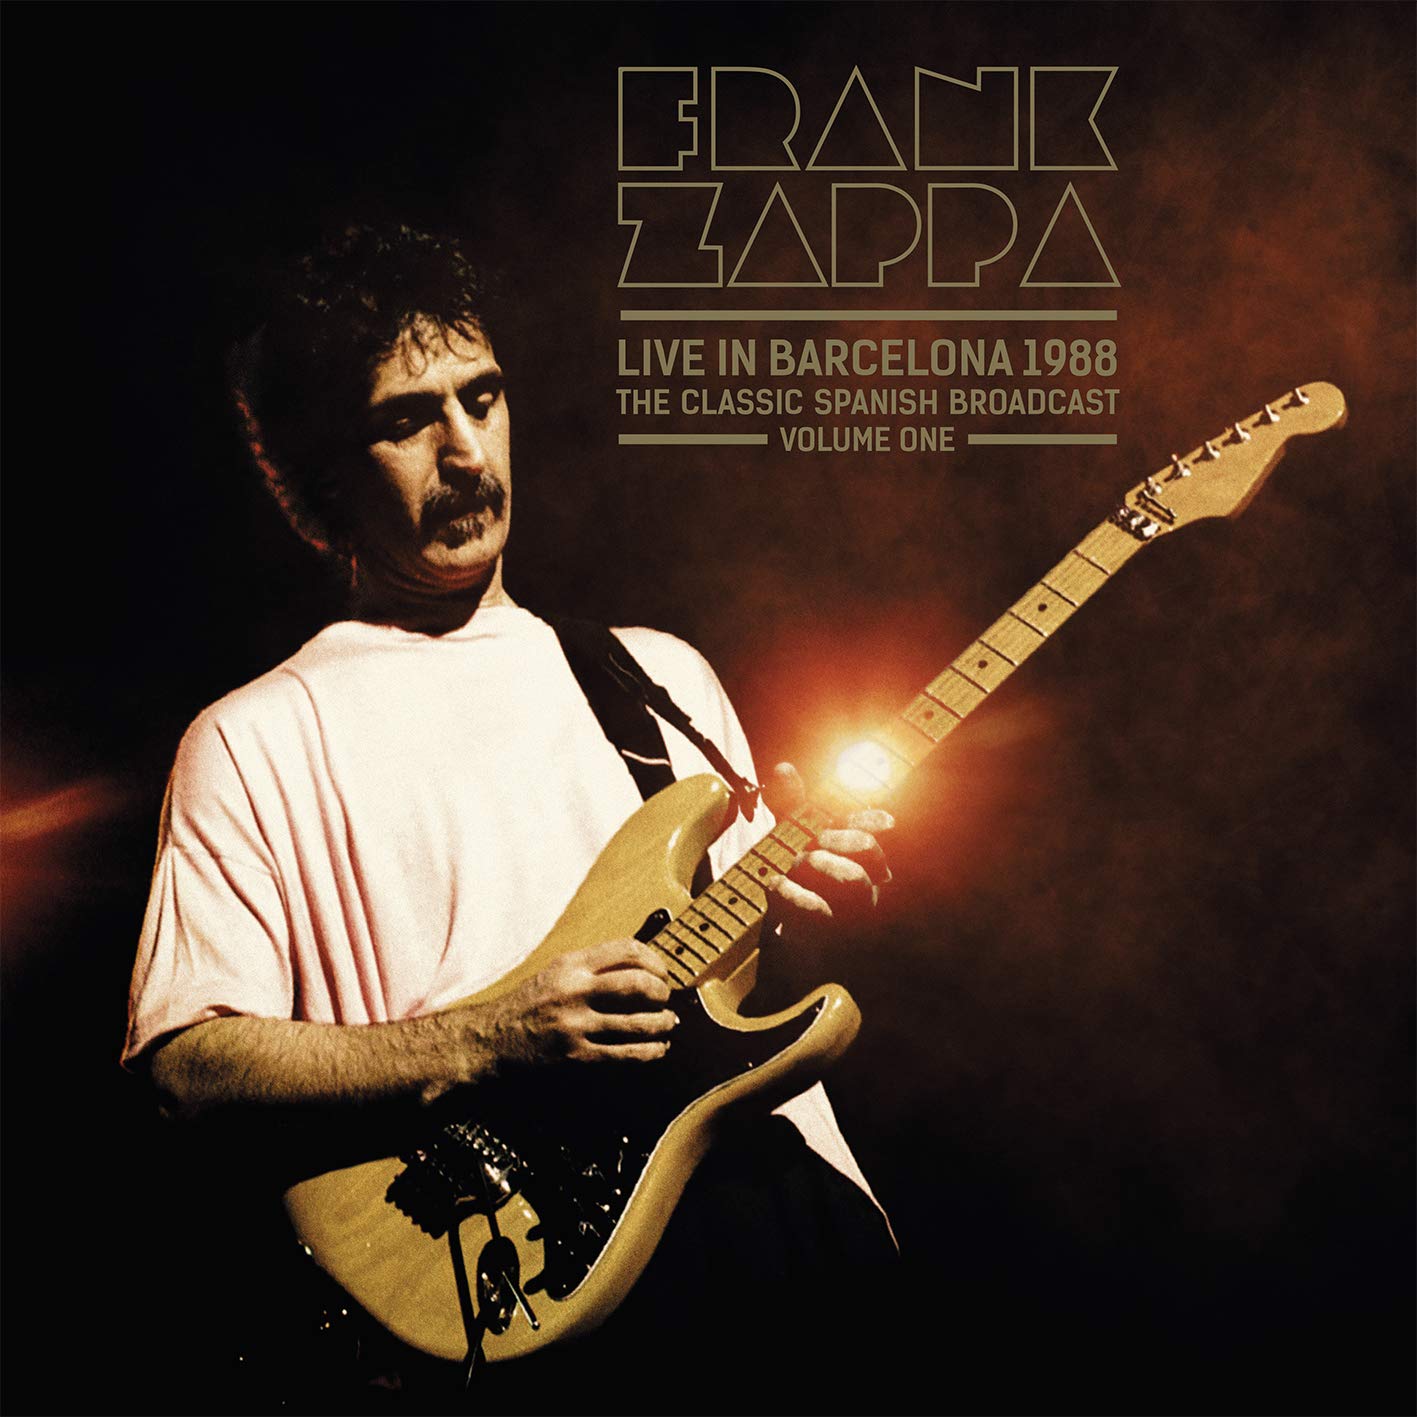 FRANK ZAPPA (& THE MOTHERS OF INVENTION) / フランク・ザッパ / LIVE IN BARCELONA 1988 VOL.1 (2LP)